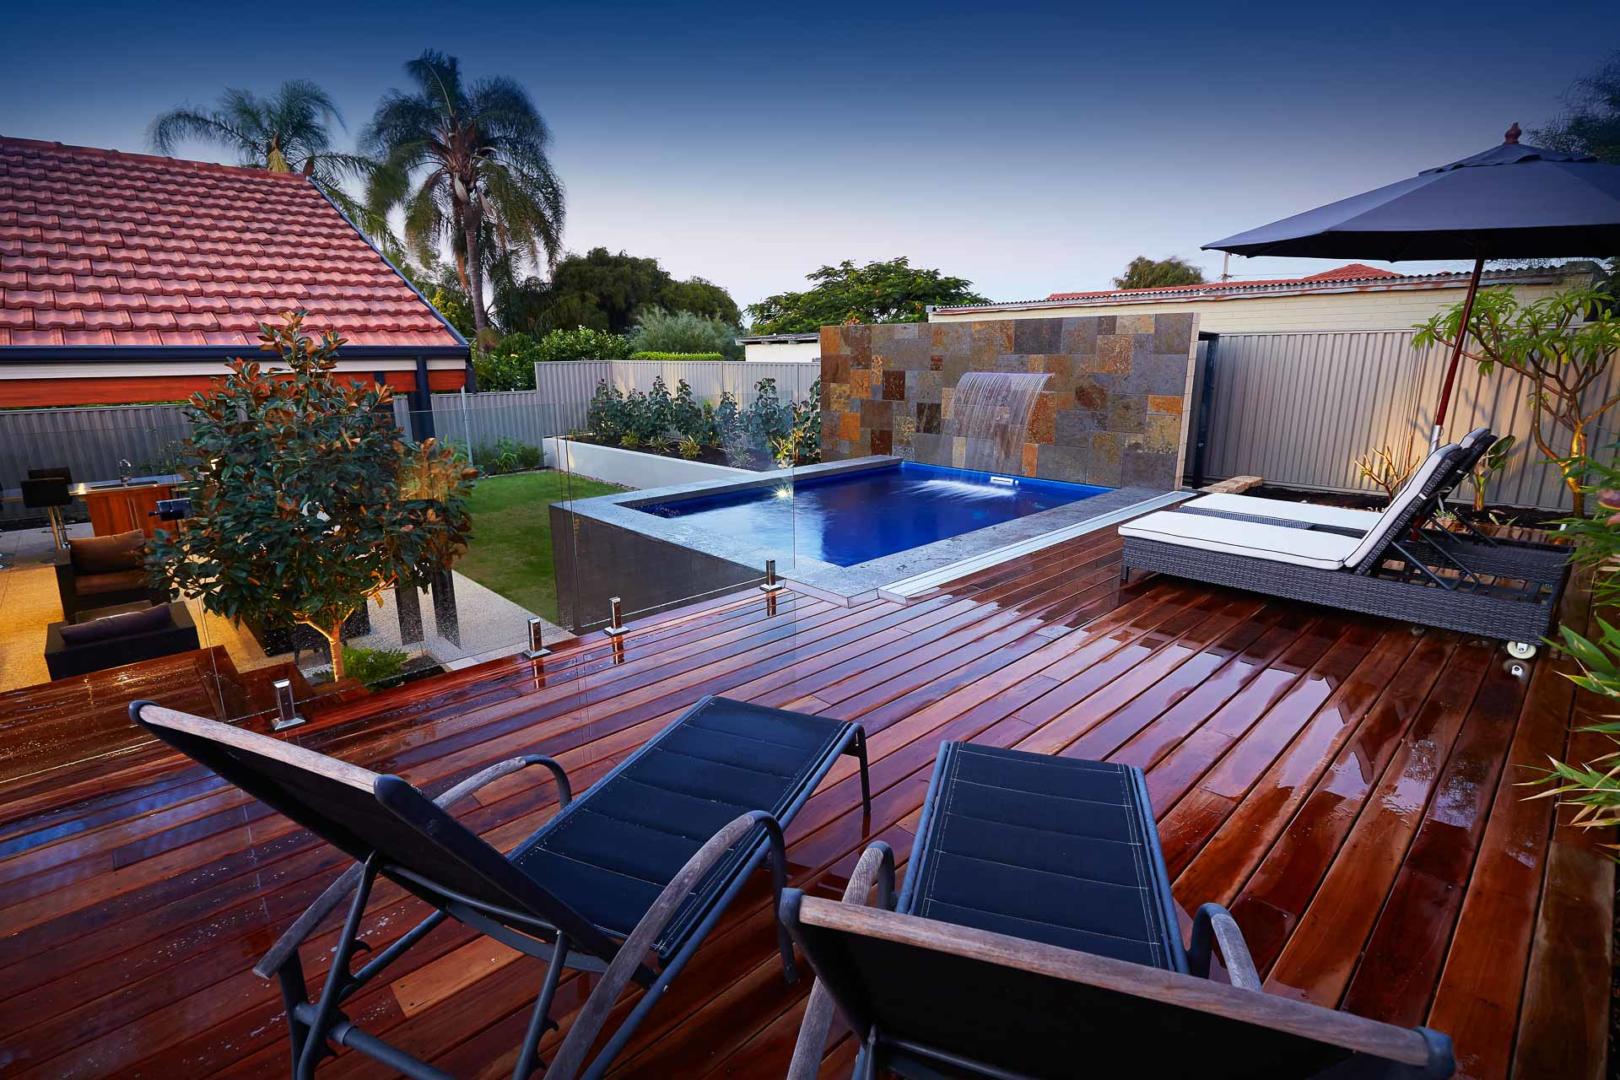 What are the benefits of an above ground pool - Is there a chance an above ground pool will look tacky, Australian Outdoor Living.